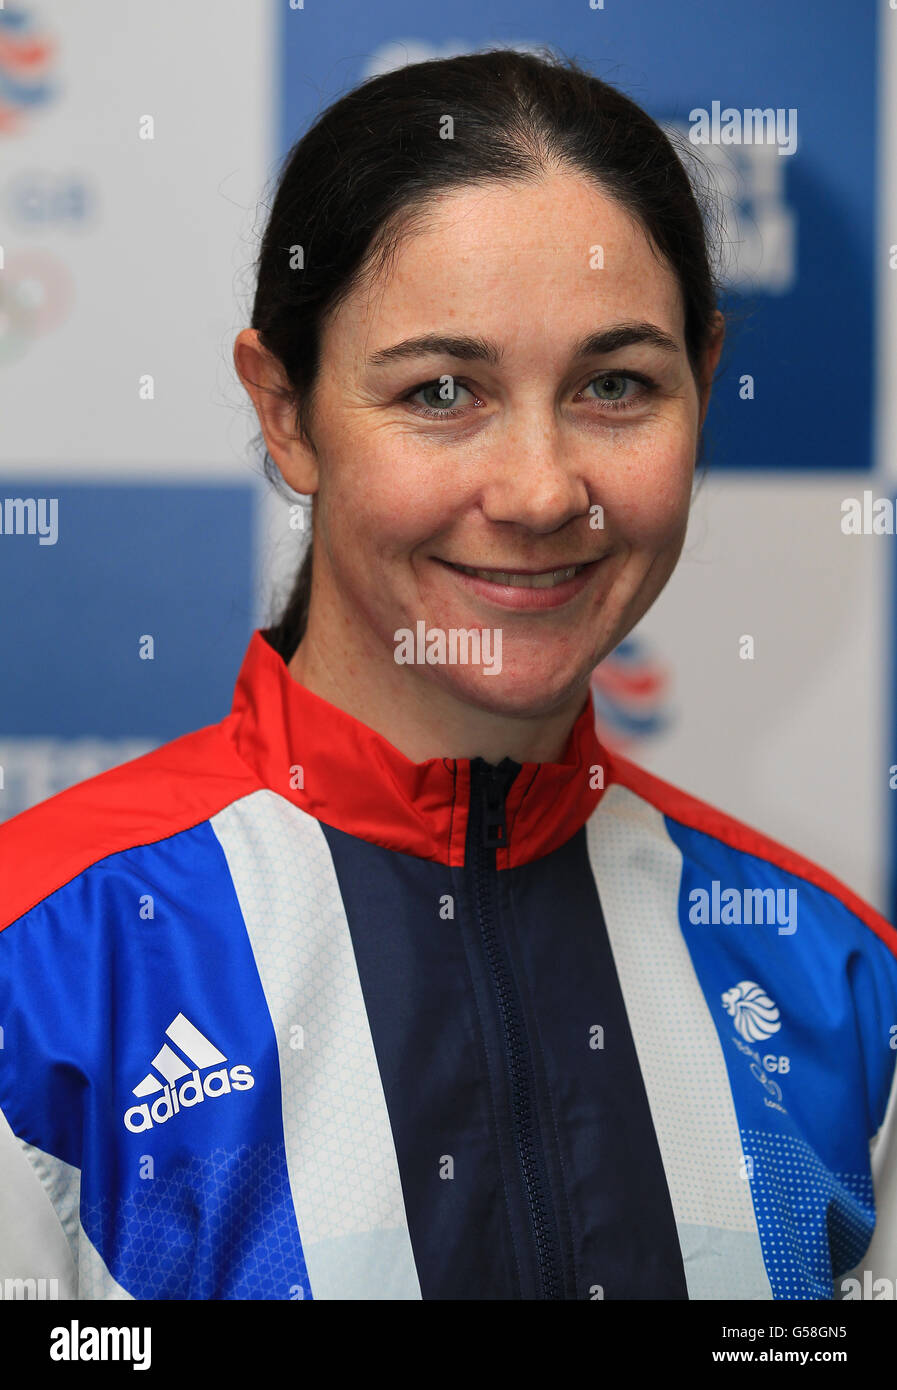 Lindsey Maguire during the London 2012 kitting out session at Loughborough University, Loughborough. Stock Photo